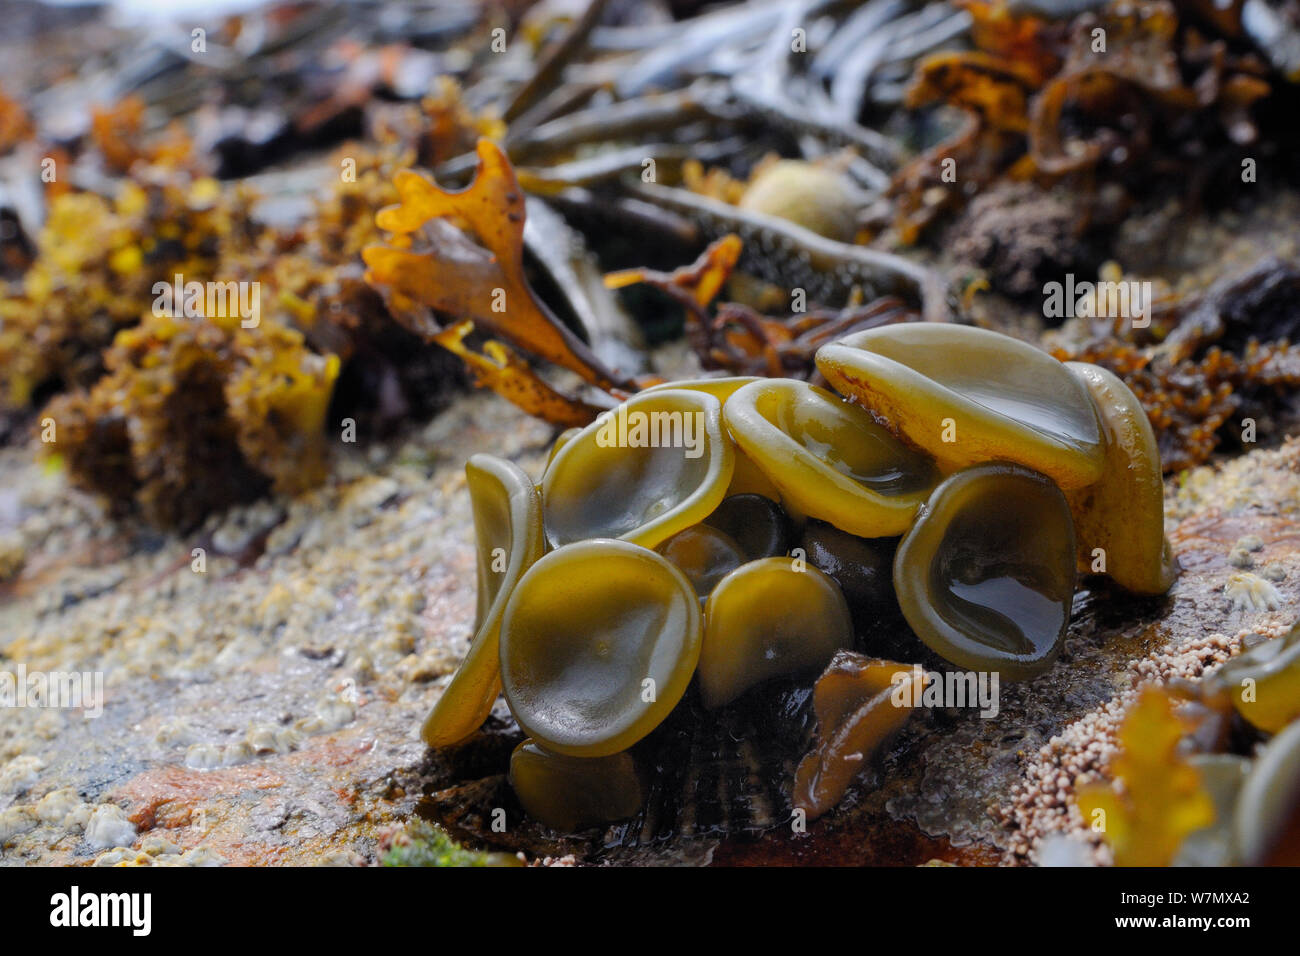 Young Sea thong (Himanthalia elongata) 'buttons' on intertidal rocks exposed at low tide, Crail, Fife, UK, July Stock Photo